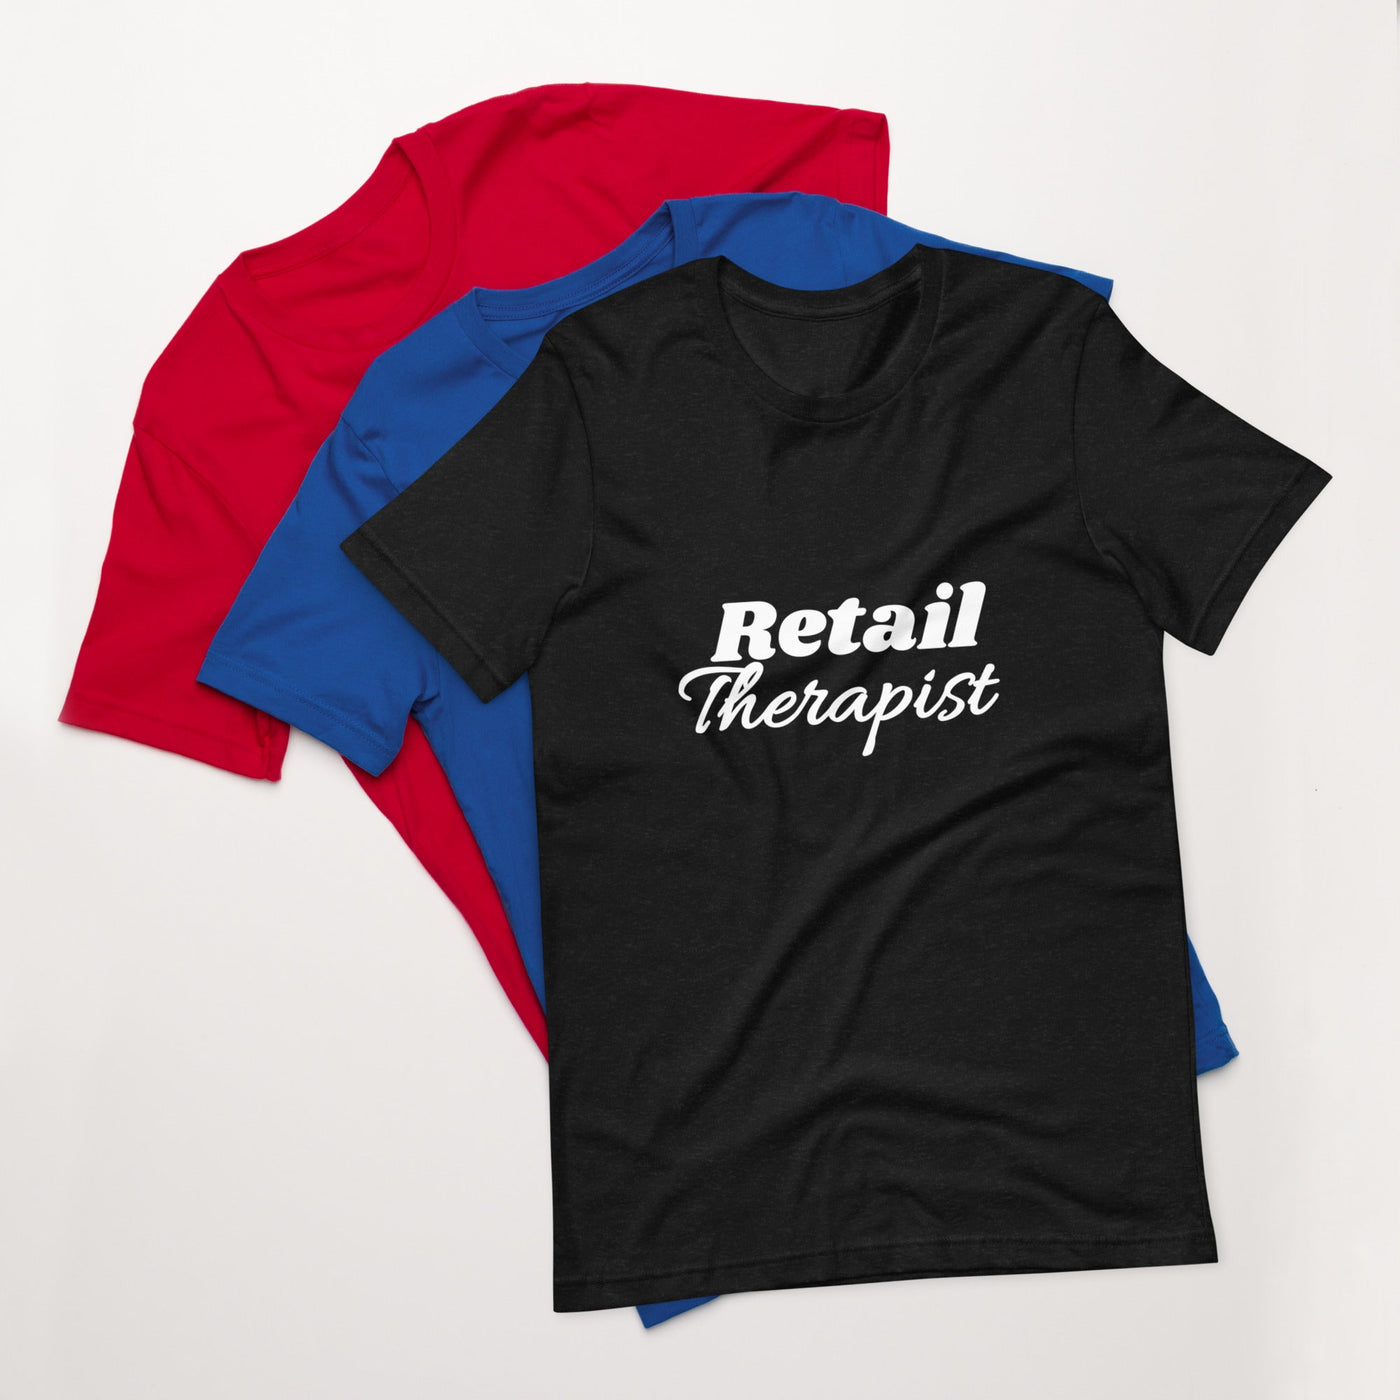 Retail Therapist Tee *READ DESCRIPTION FOR SHIPPING INFORMATION*